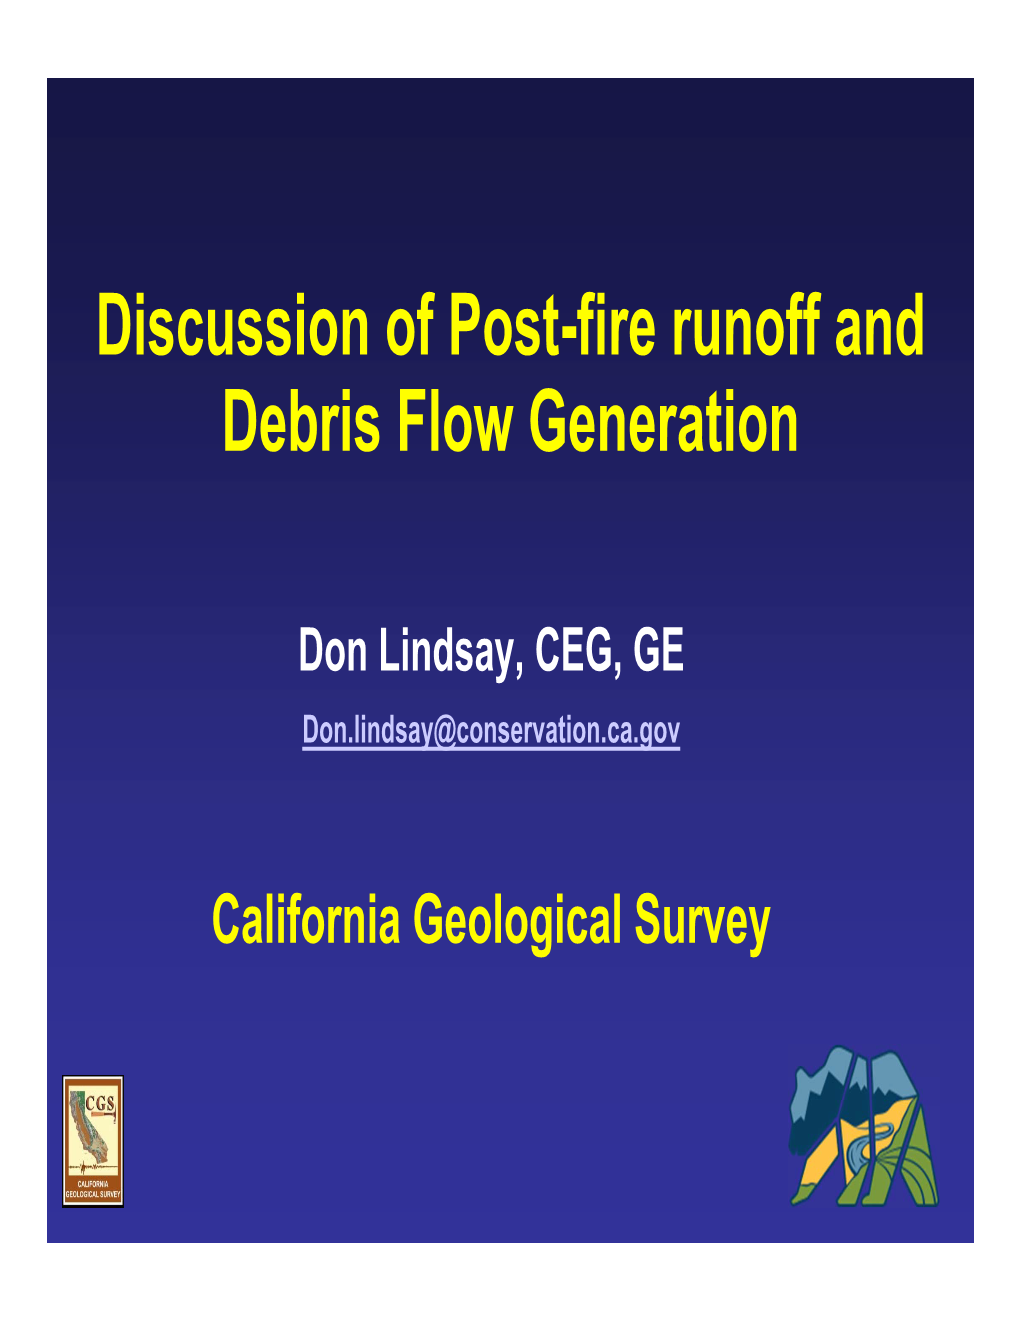 Discussion of Post-Fire Runoff and Debris Flow Generation